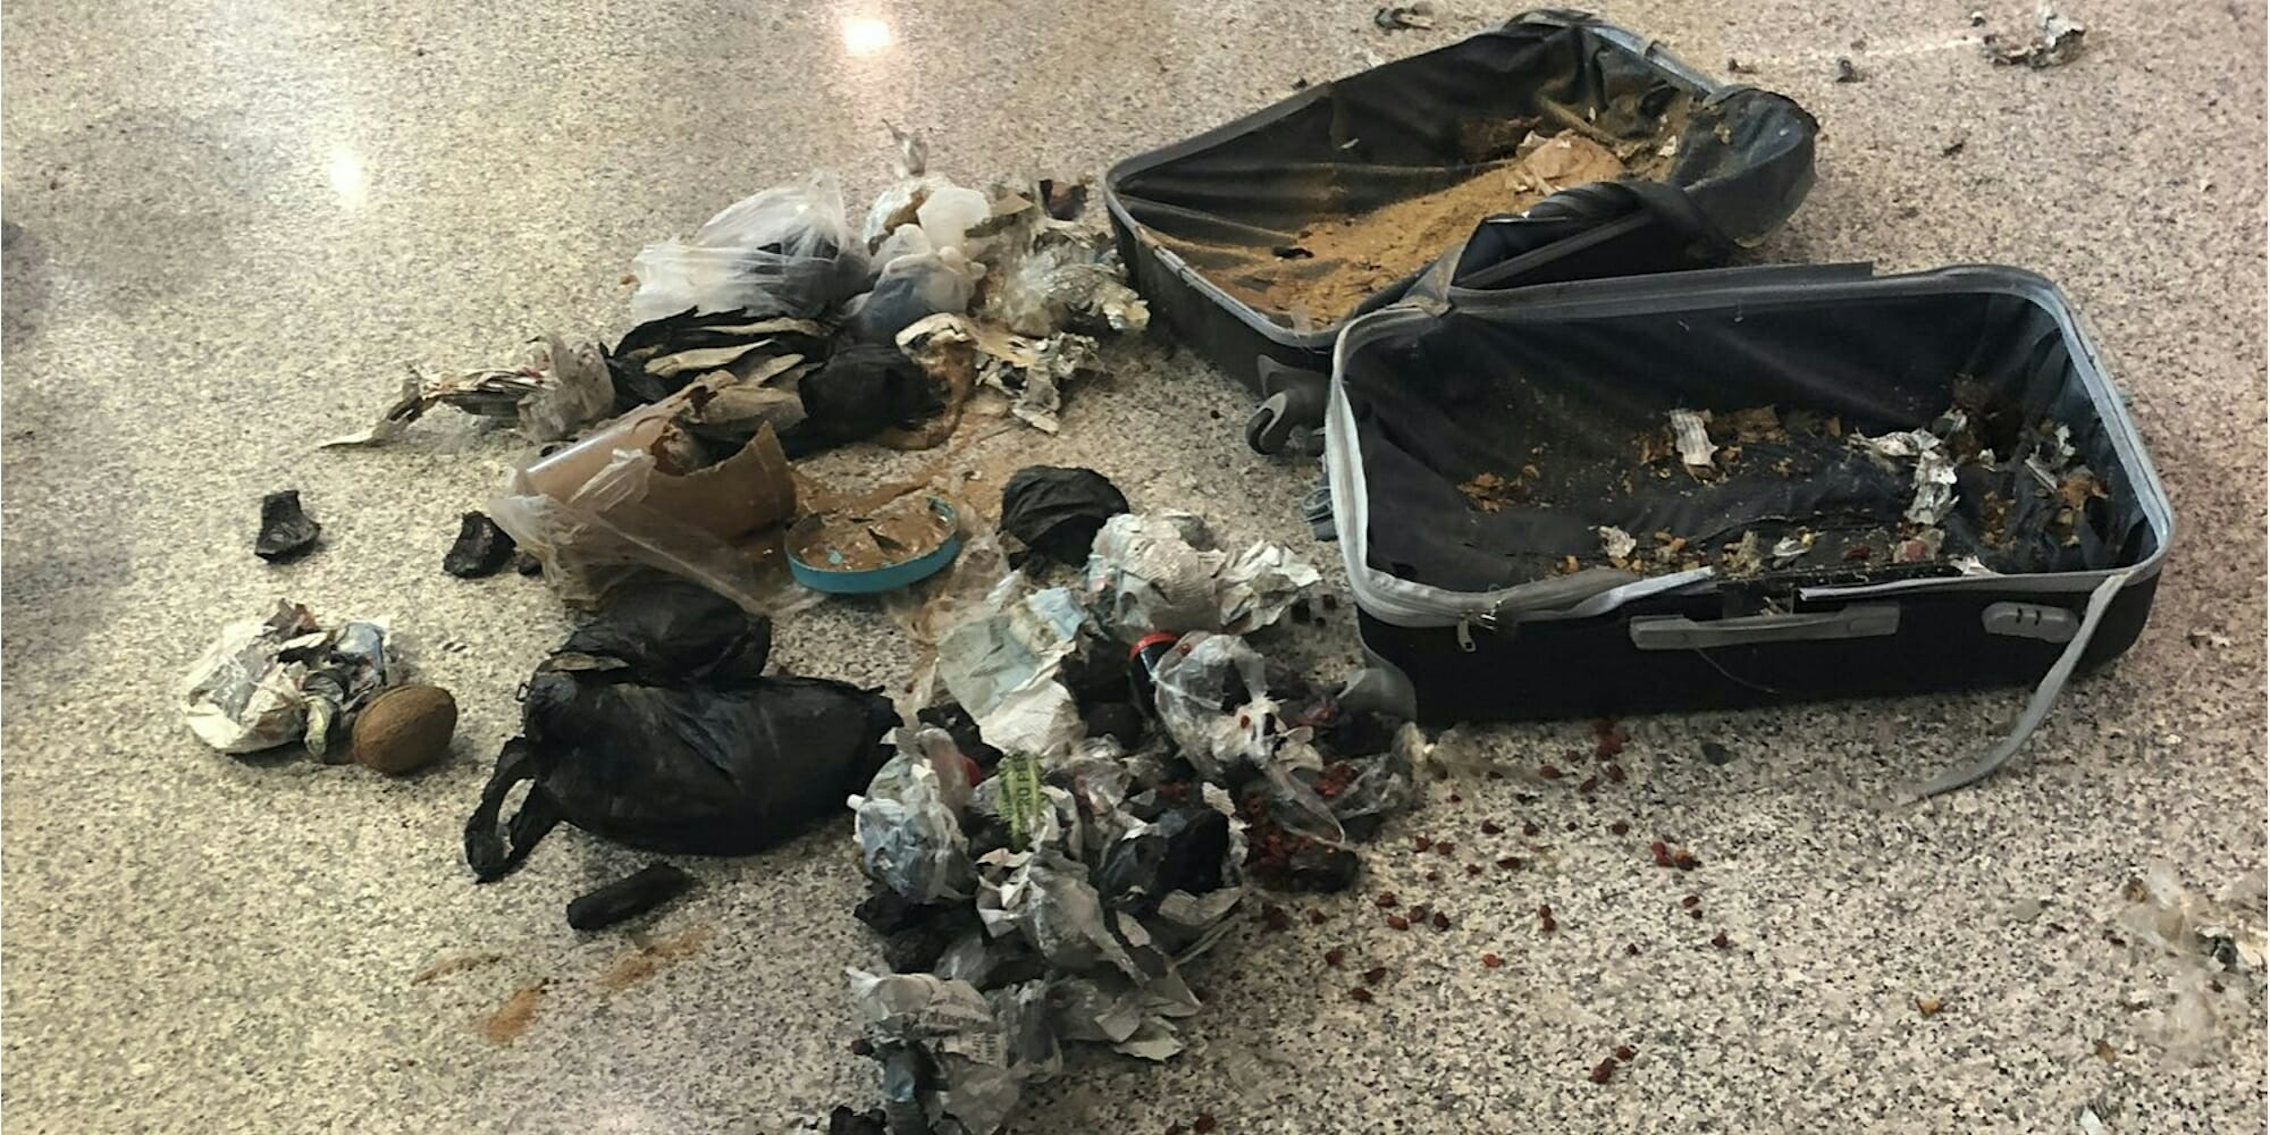 Italian police exploded a bag filled with coconuts at an airport in Rome.